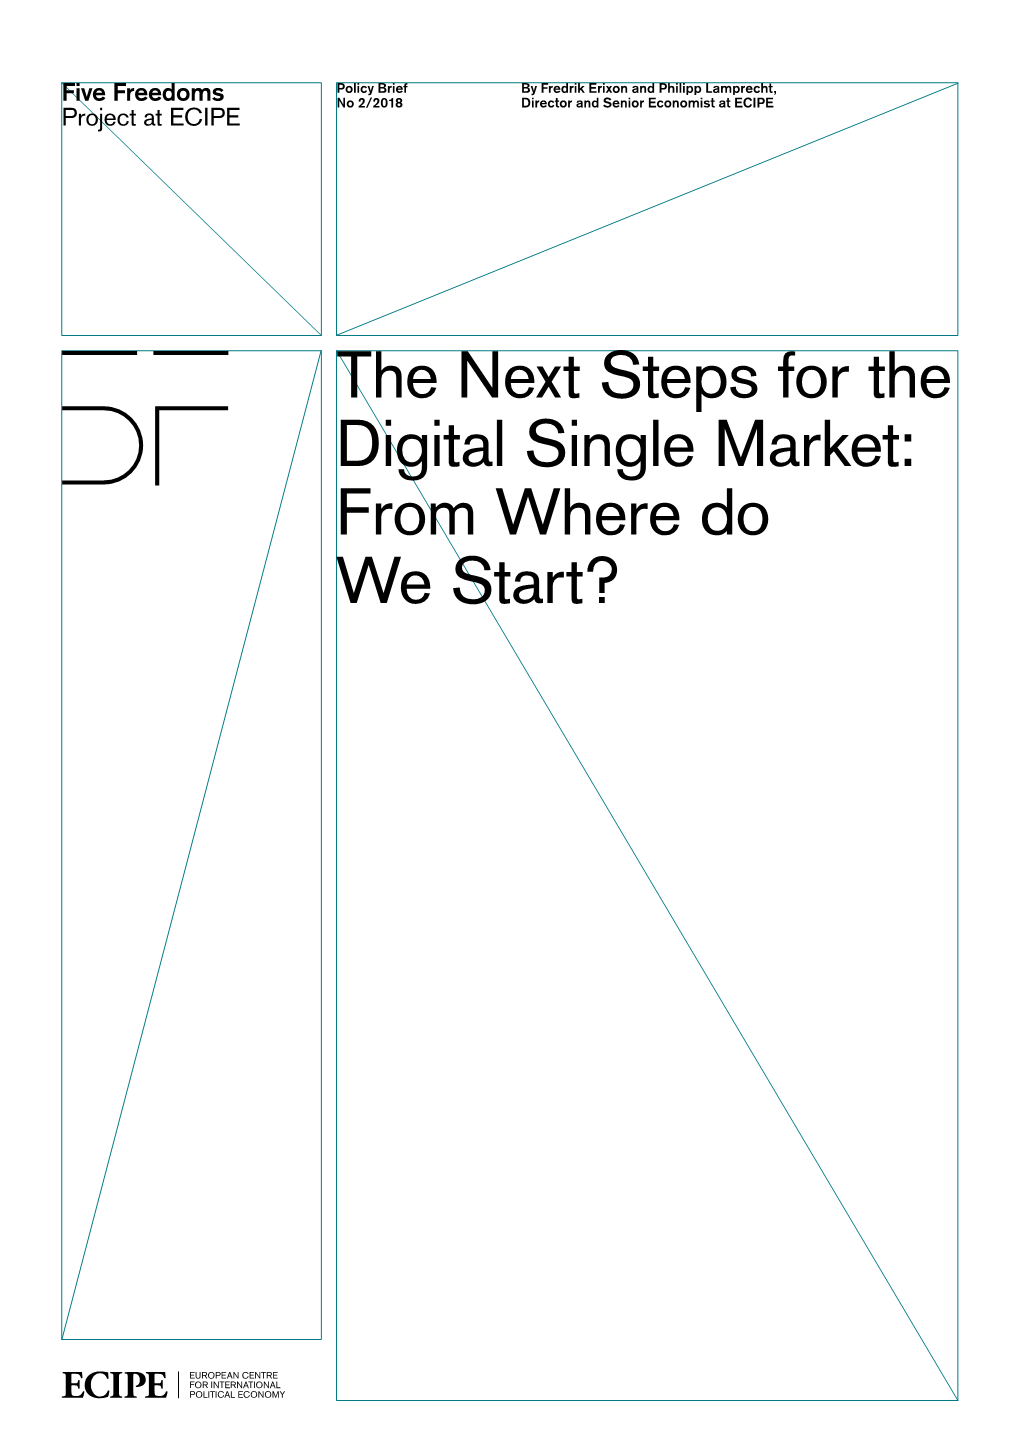 The Next Steps for the Digital Single Market